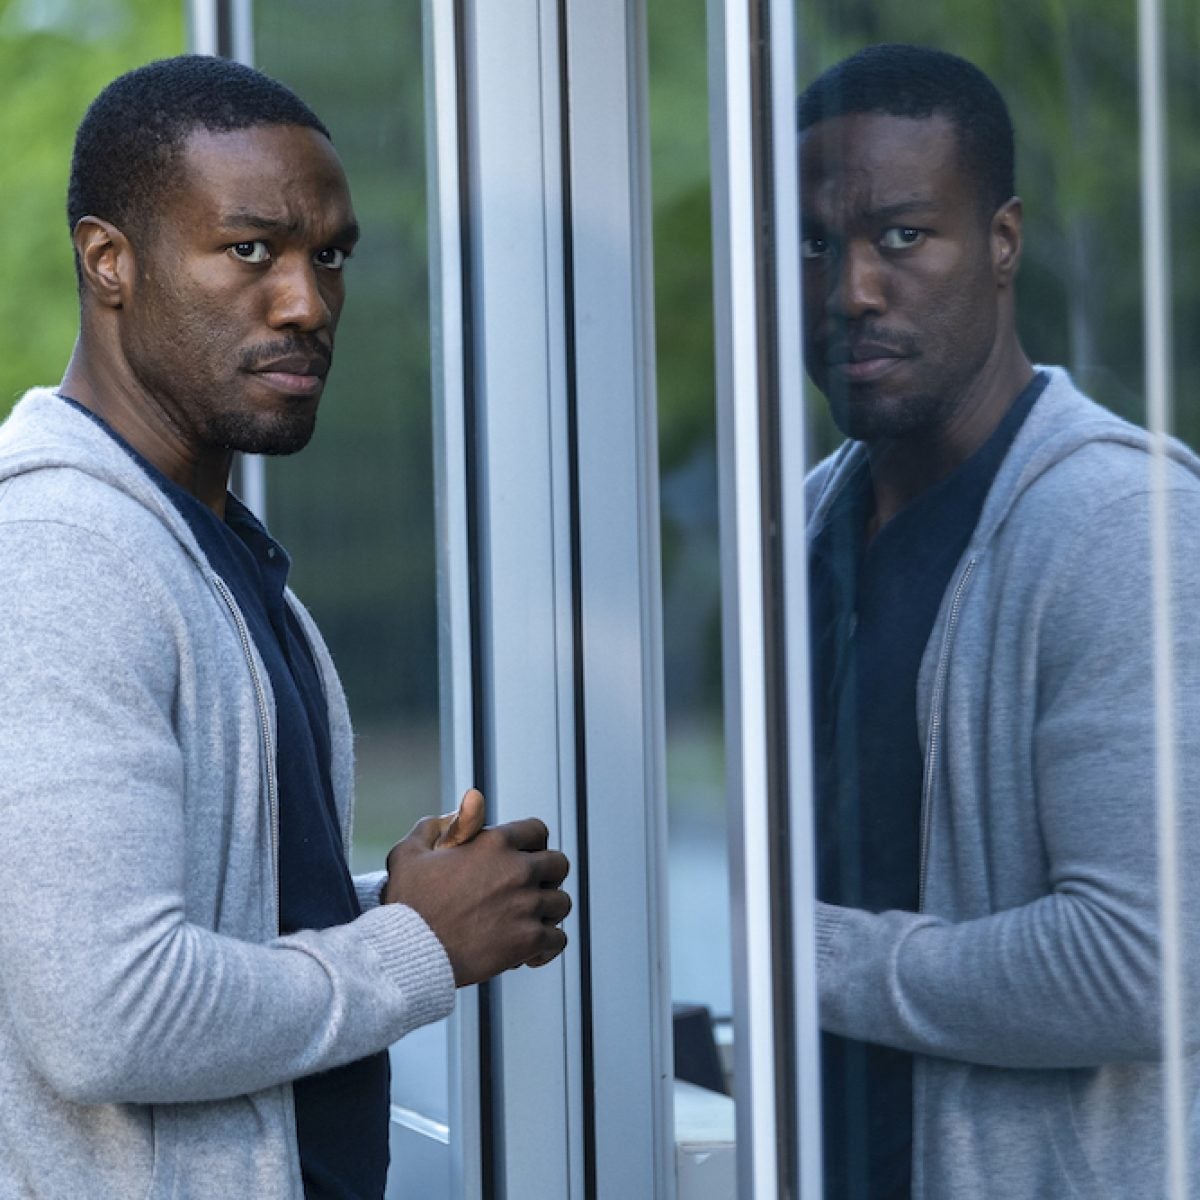 ESSENCE Cover Star Yahya Abdul-Mateen II's Best Roles To Date